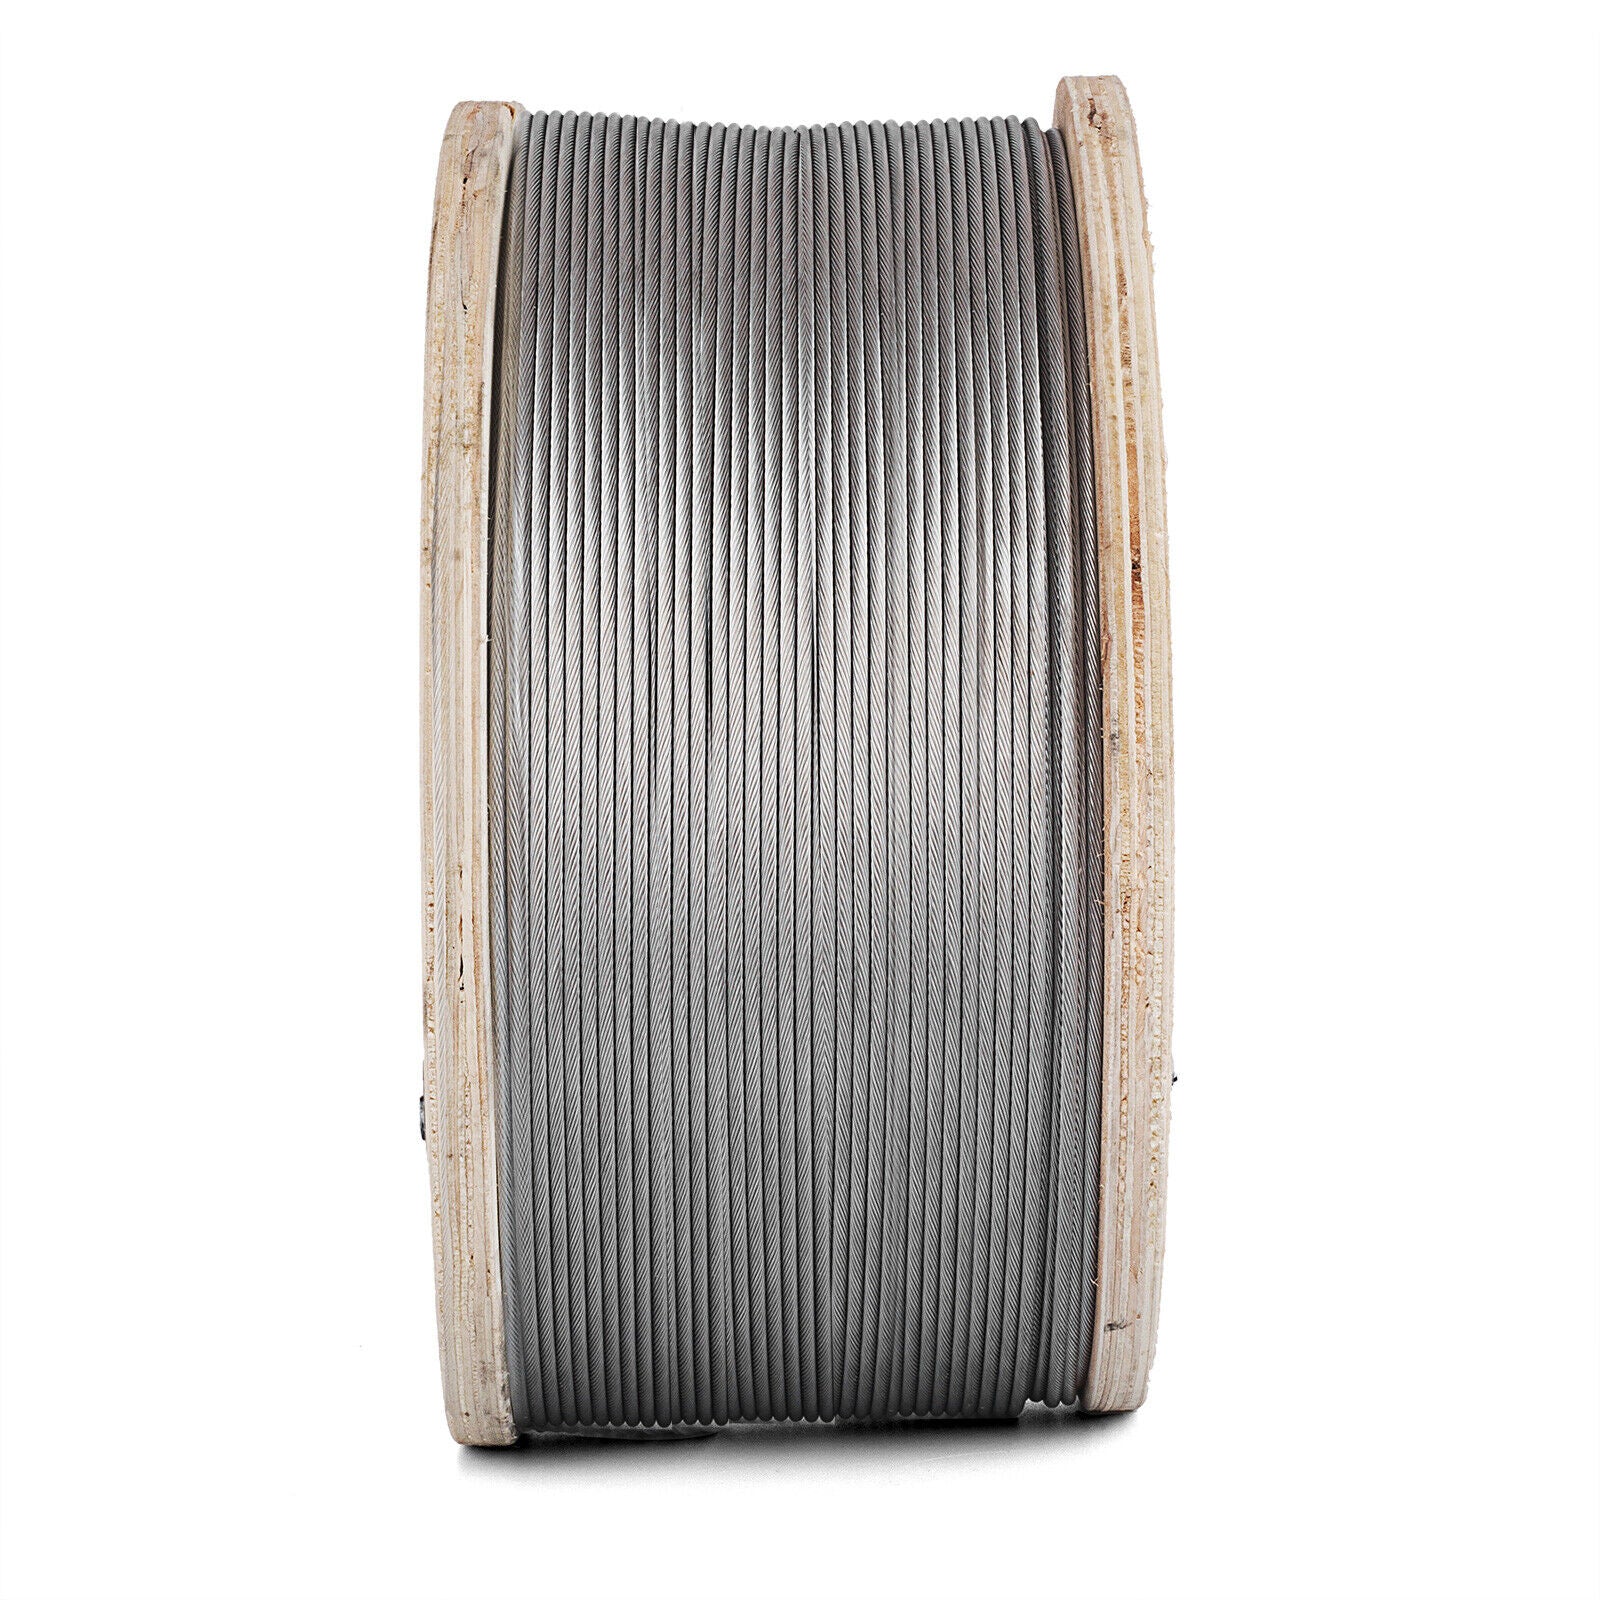 T316 Stainless Steel Cable Wire Rope 500FT 1/8